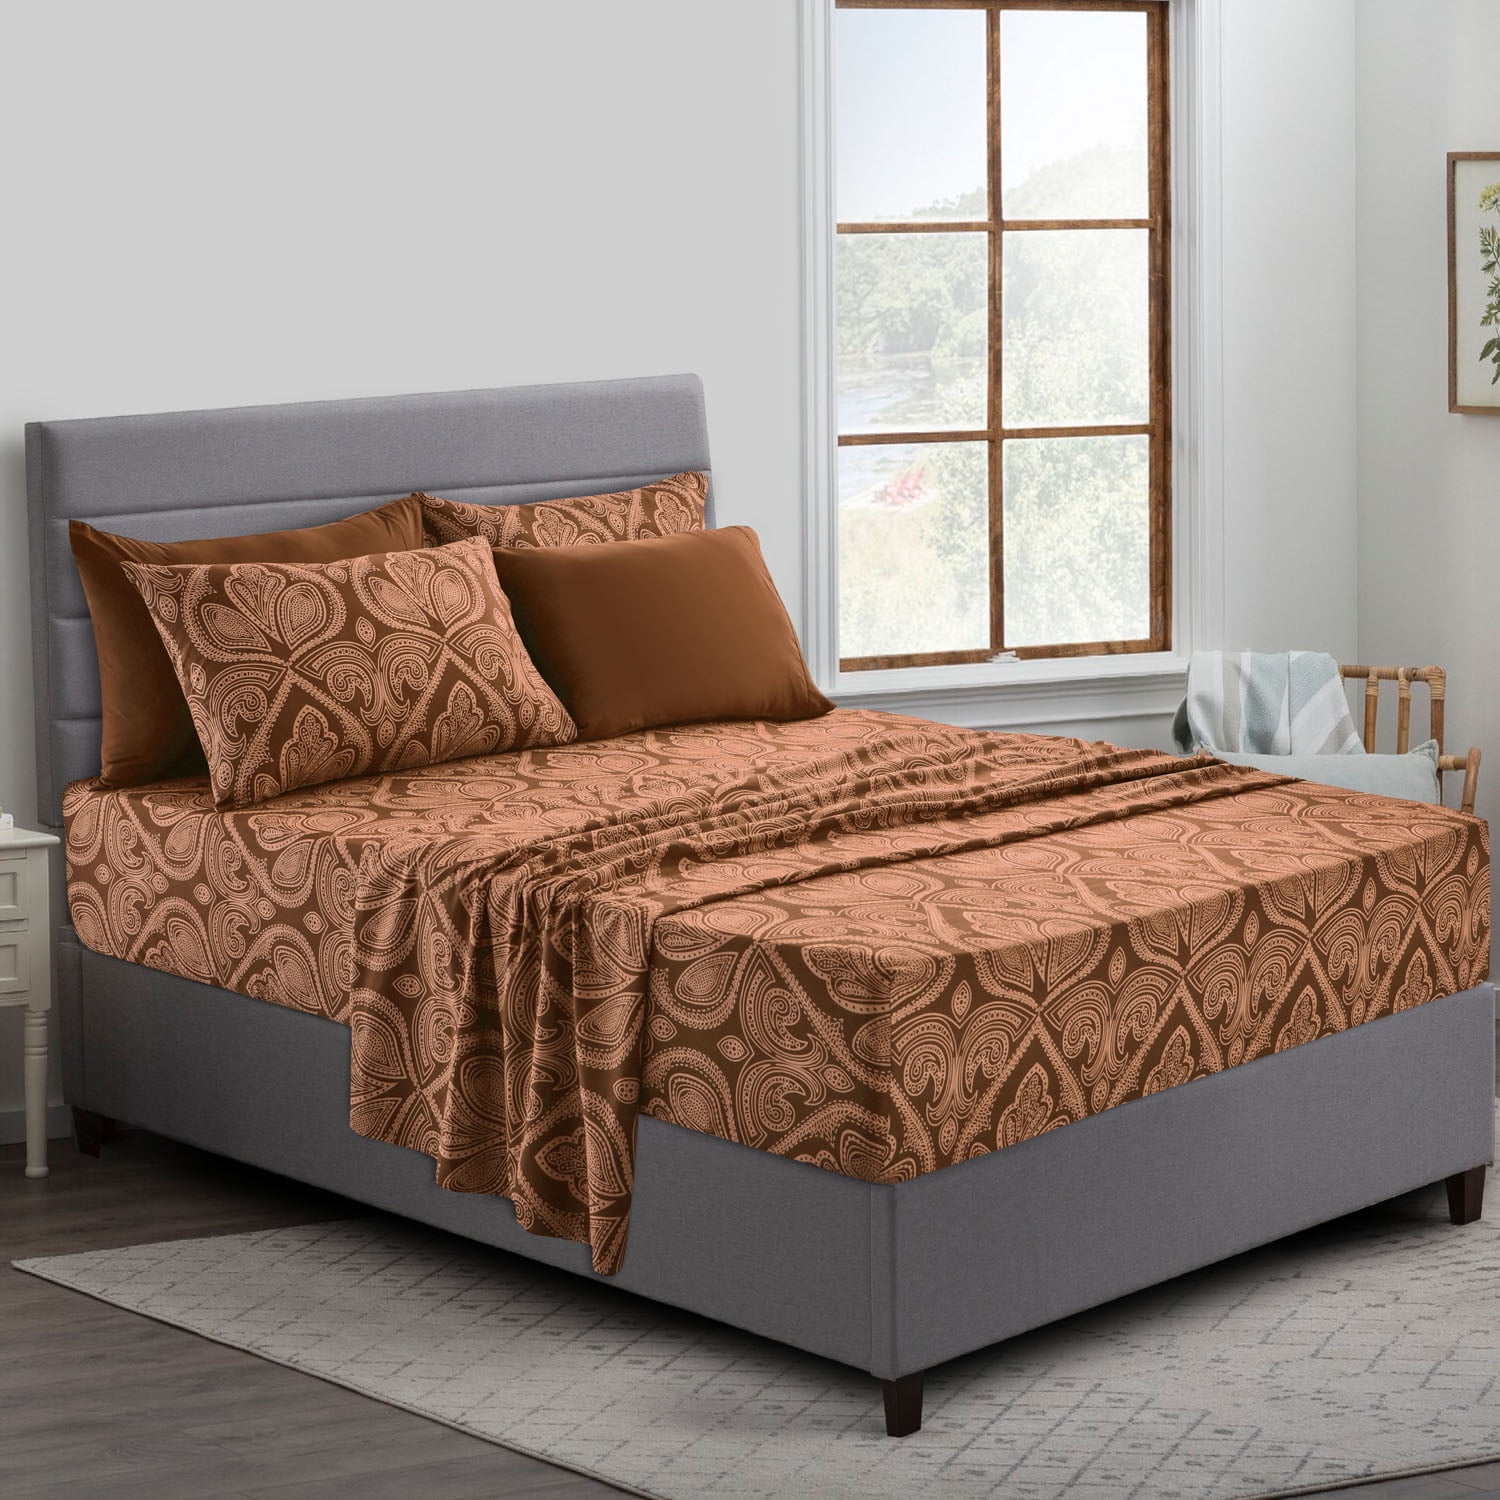 Details about   Extra Deep Wall Comfy Bedding Item 1200 Thread Count Choose Item Orange Solid 